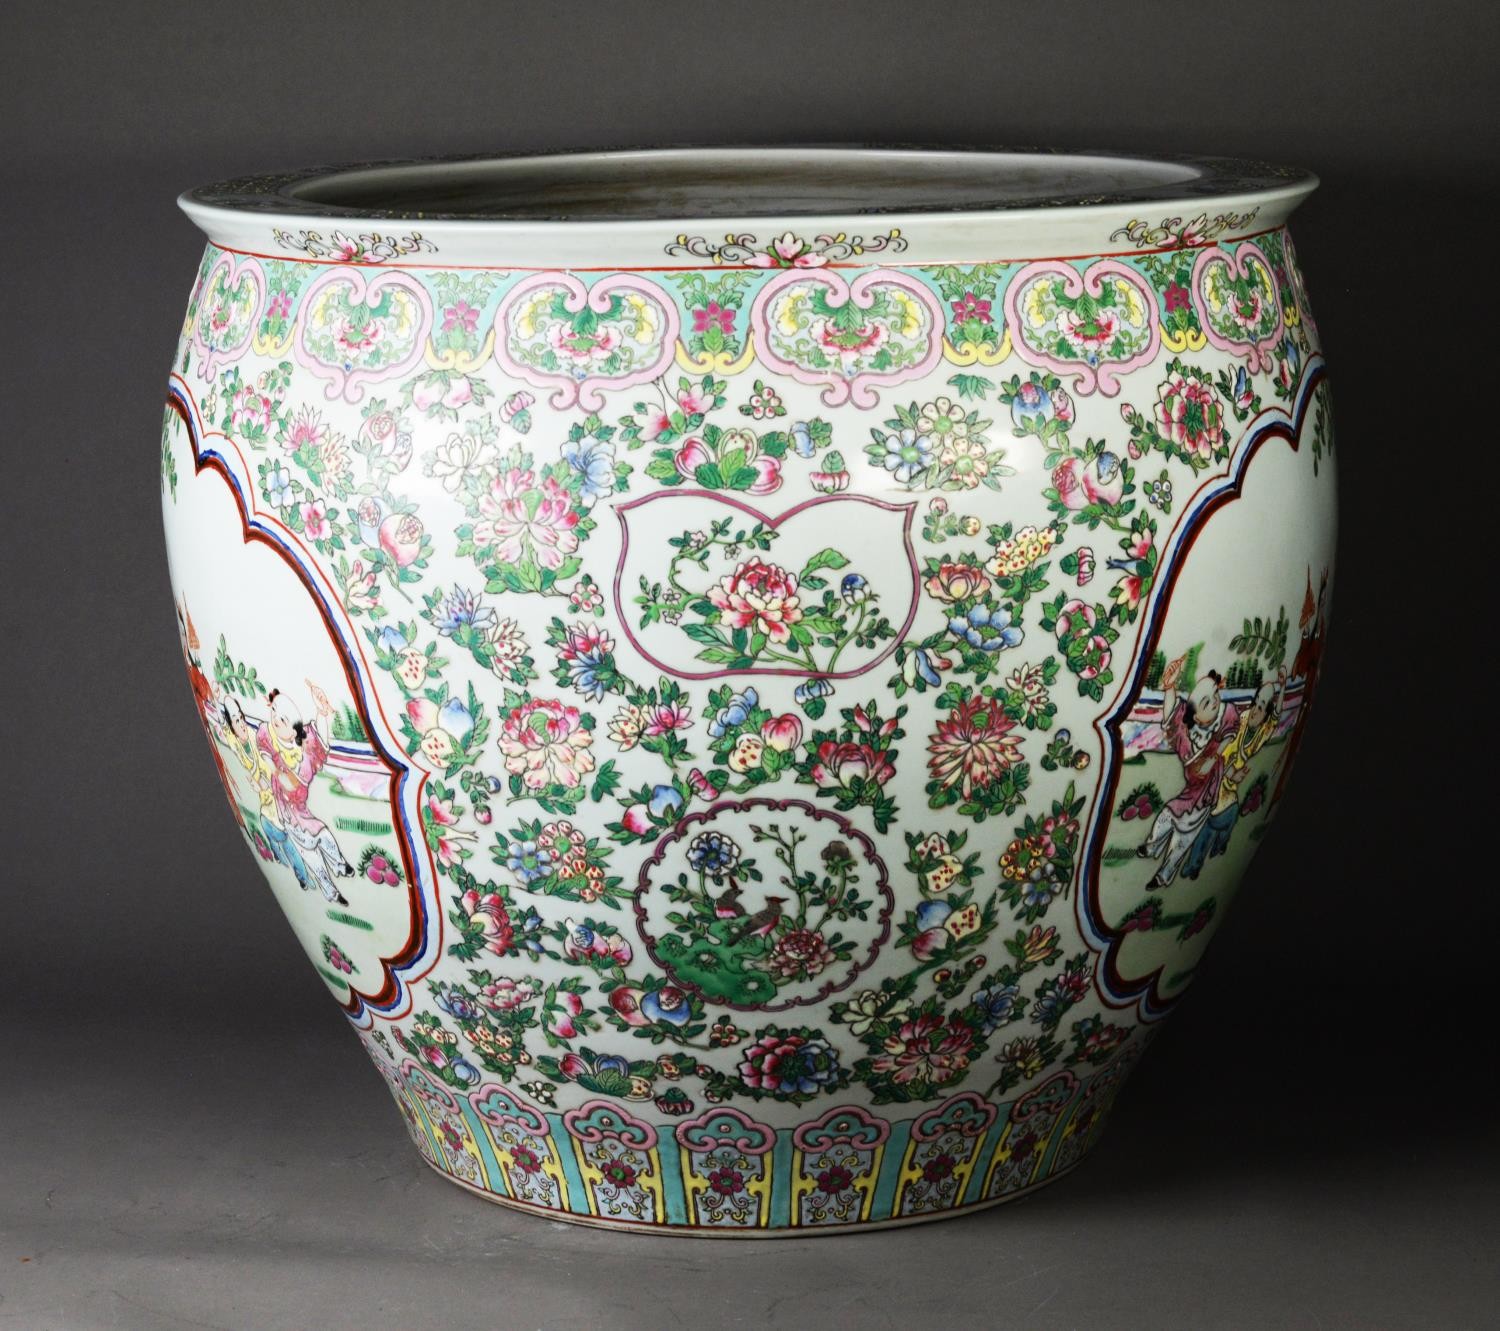 A PAIR OF LARGE CHINESE REPUBLIC PERIOD PORCELAIN FAMILLE ROSE GOLDFISH BOWLS, the reserves - Image 3 of 3